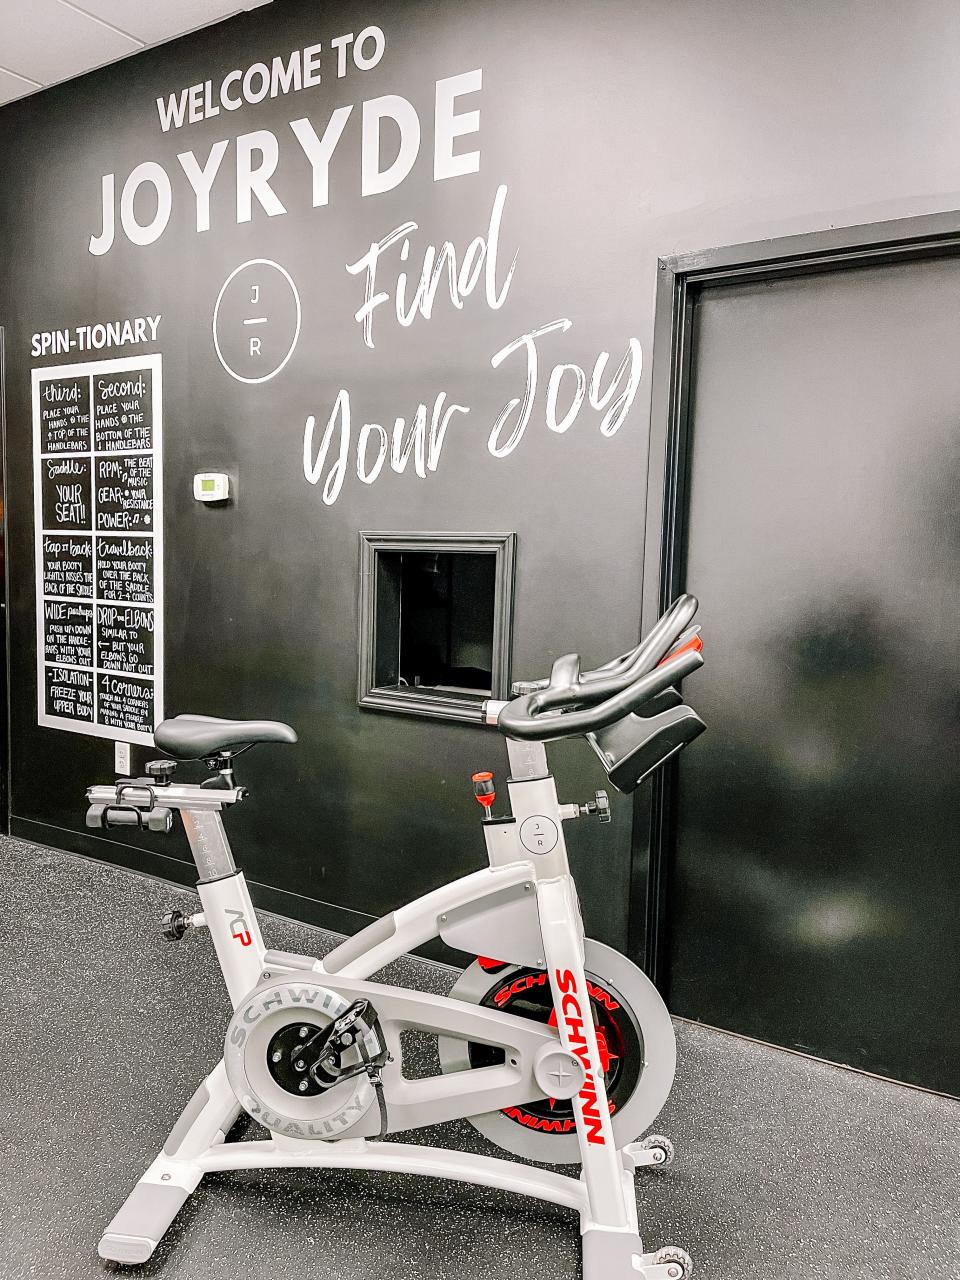 To understand the spin class lingo at JoyRyde Knox Cycling Studio, read through the Spin-tionary (spin dictionary) before entering the studio. Halls, March 8, 2023.